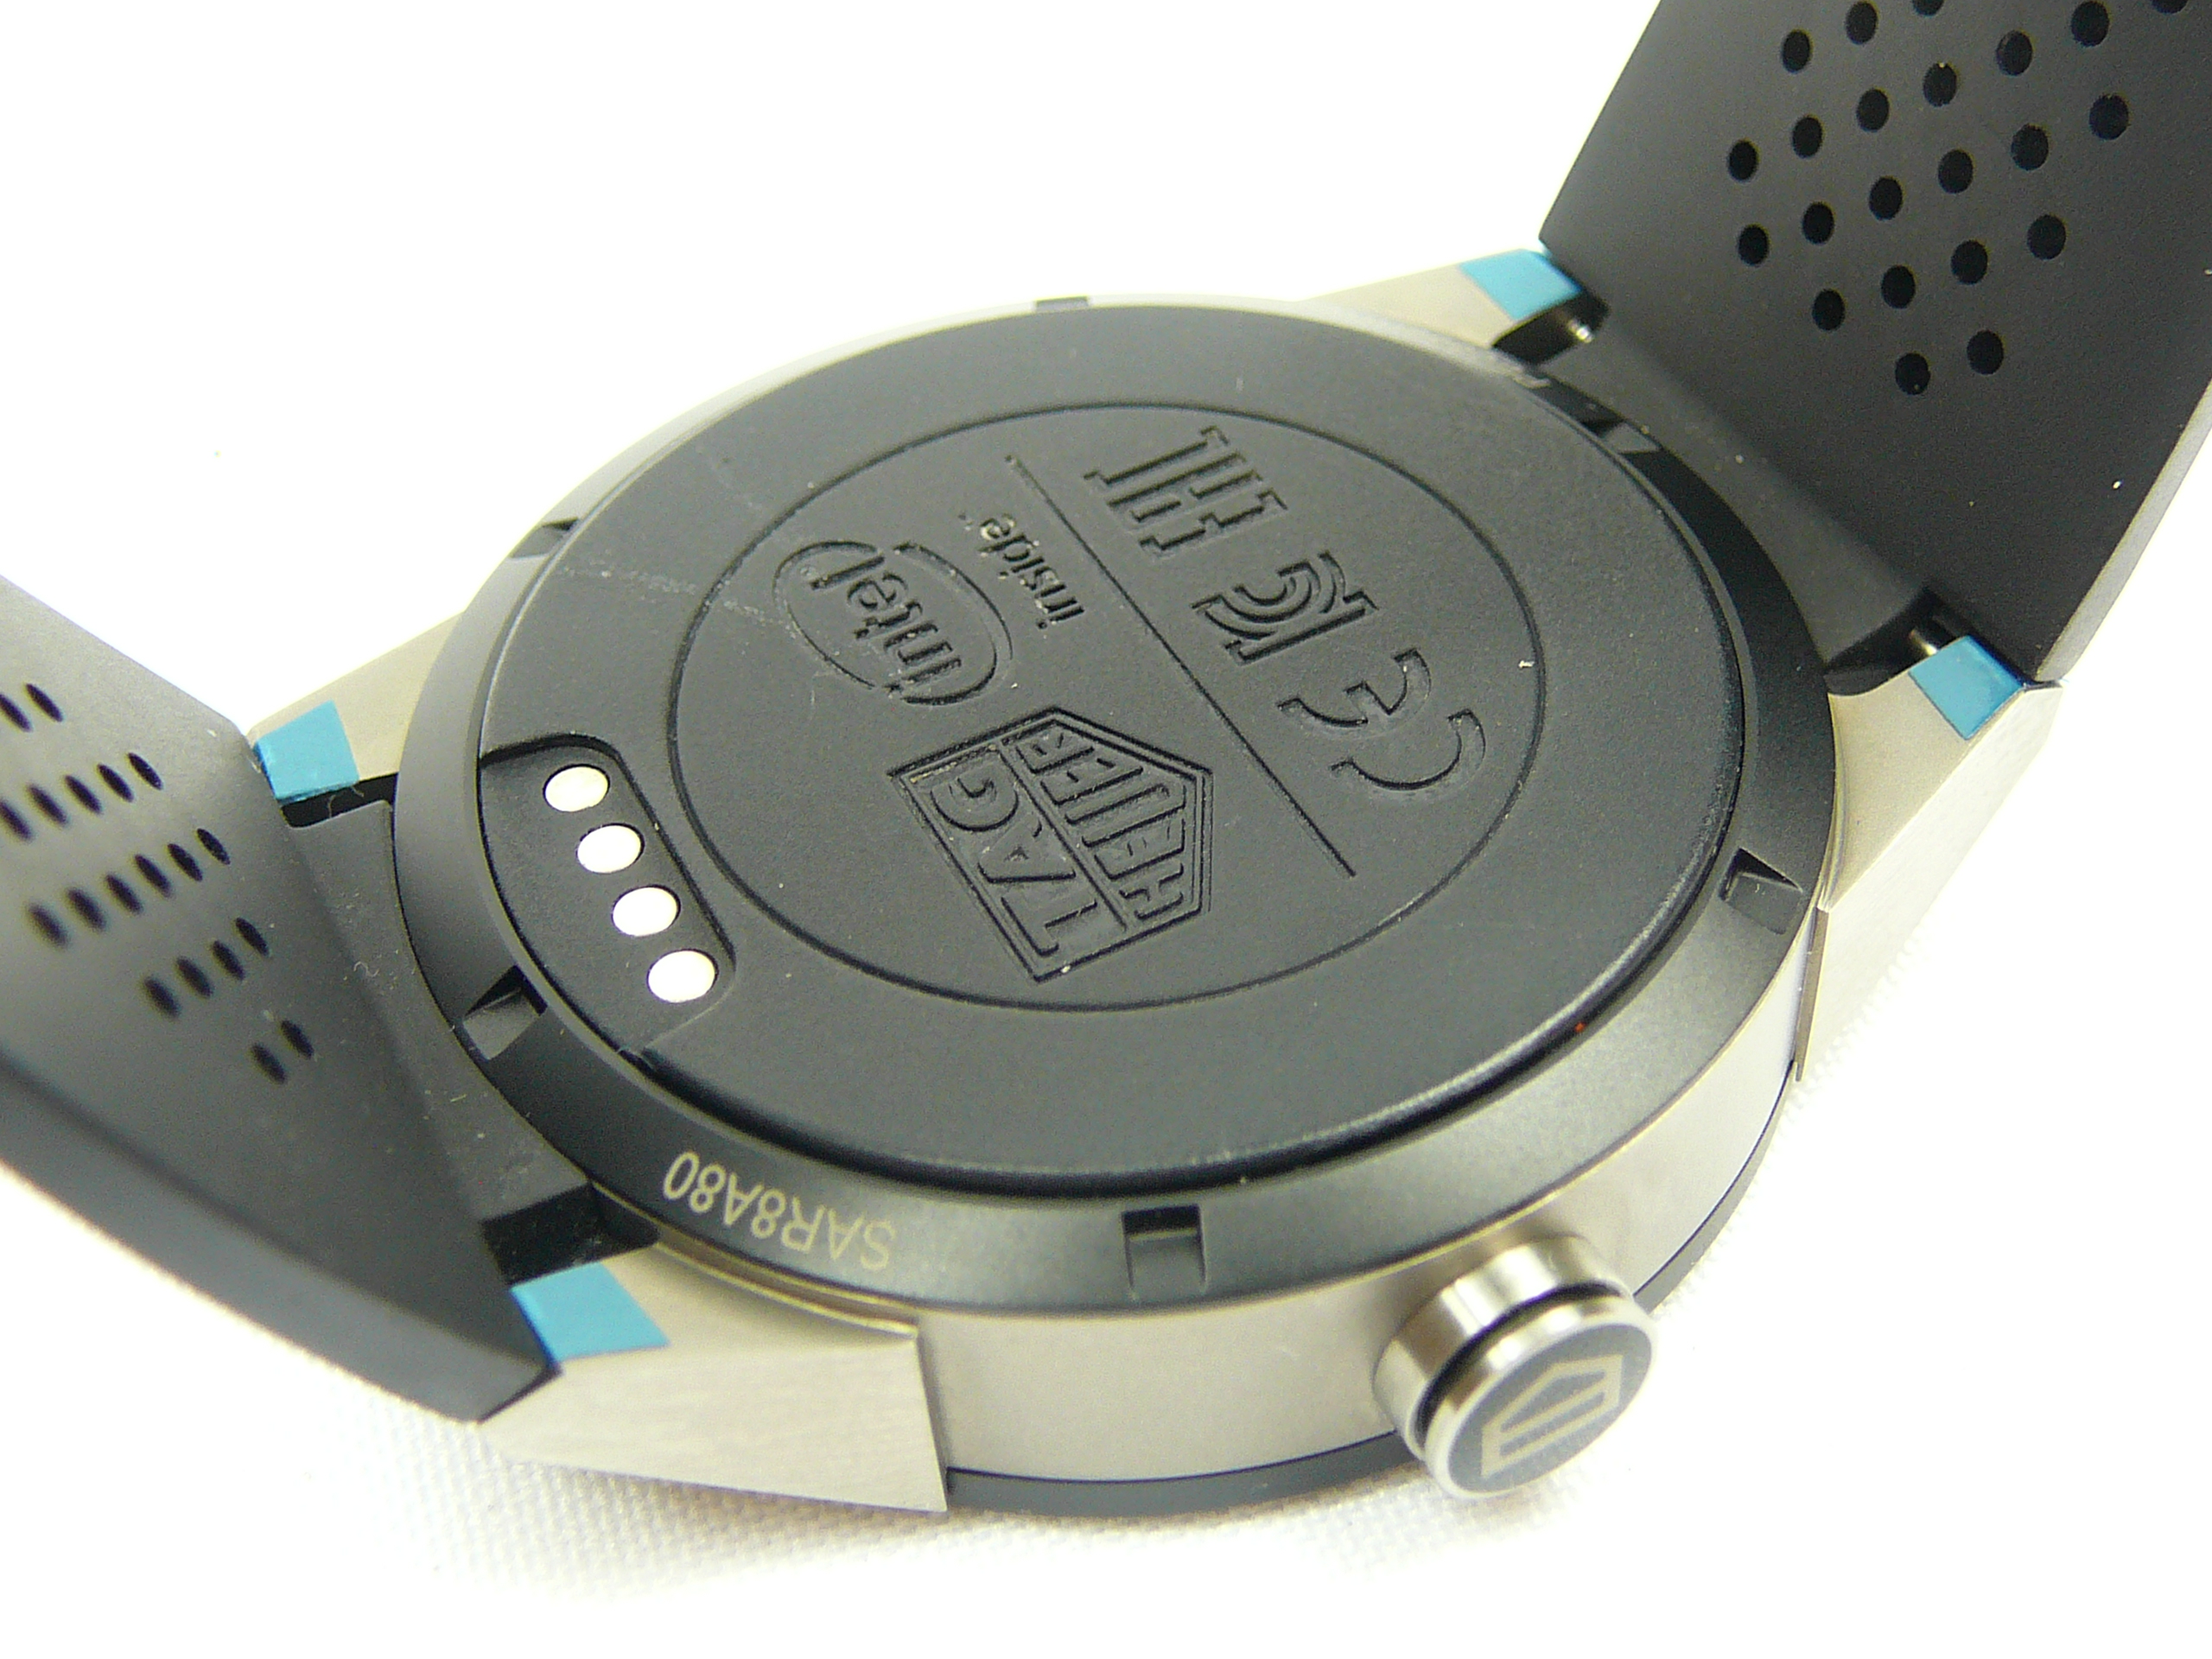 Tag Heuer Smart watch - Image 3 of 3